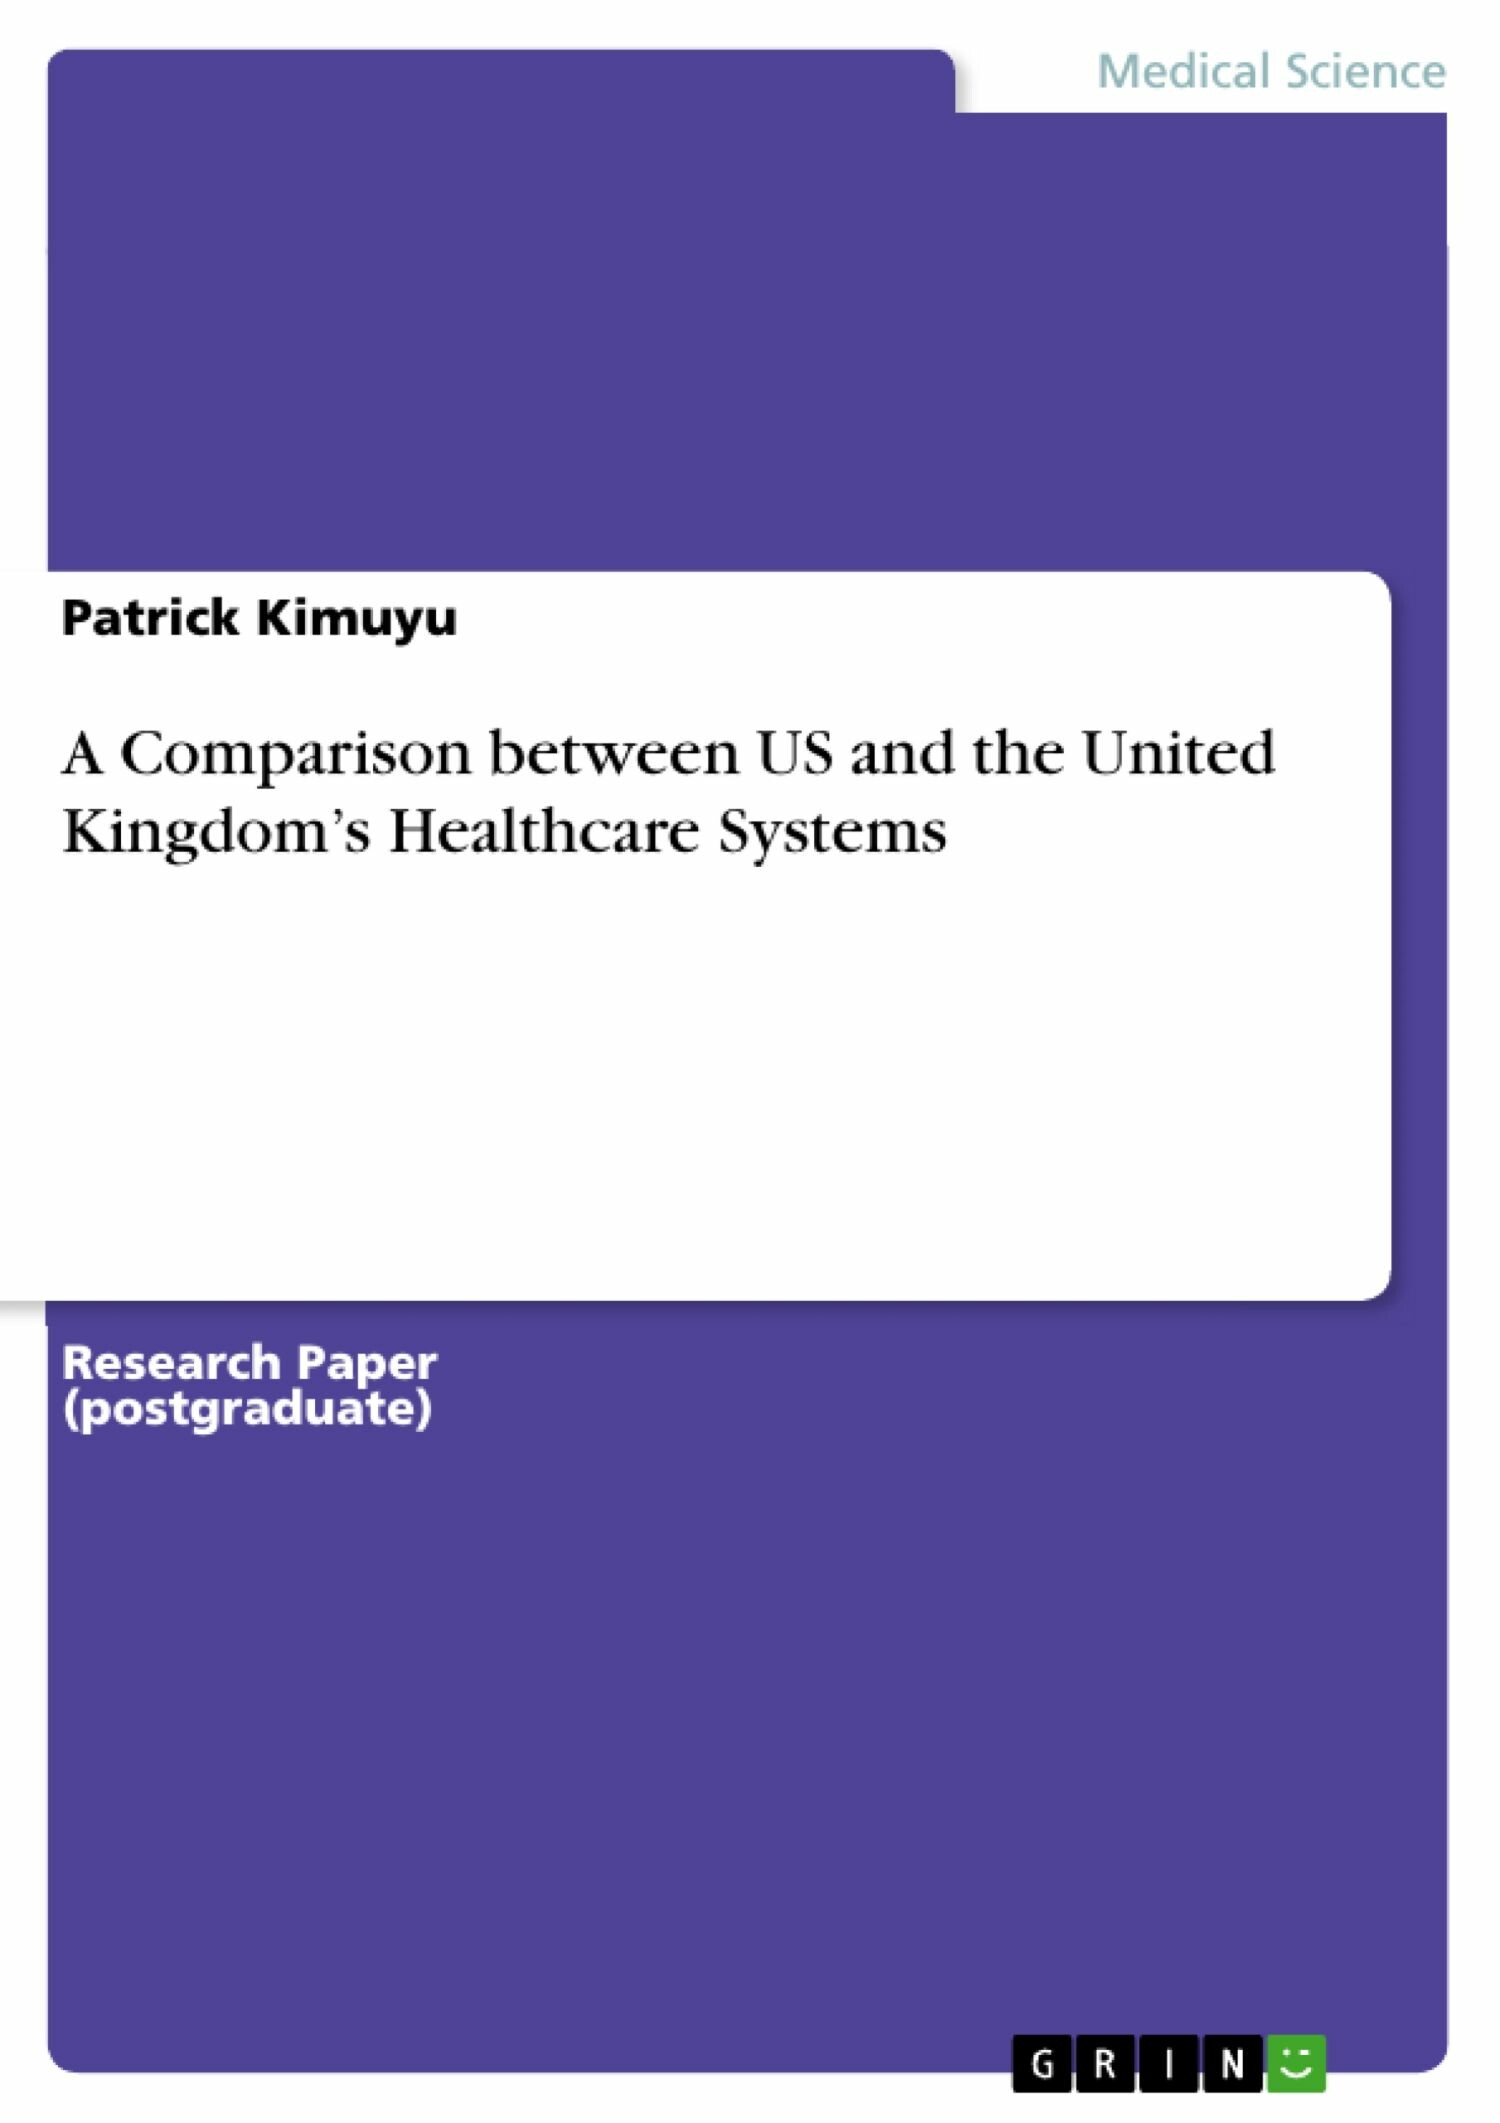 A Comparison between US and the United Kingdom's Healthcare Systems